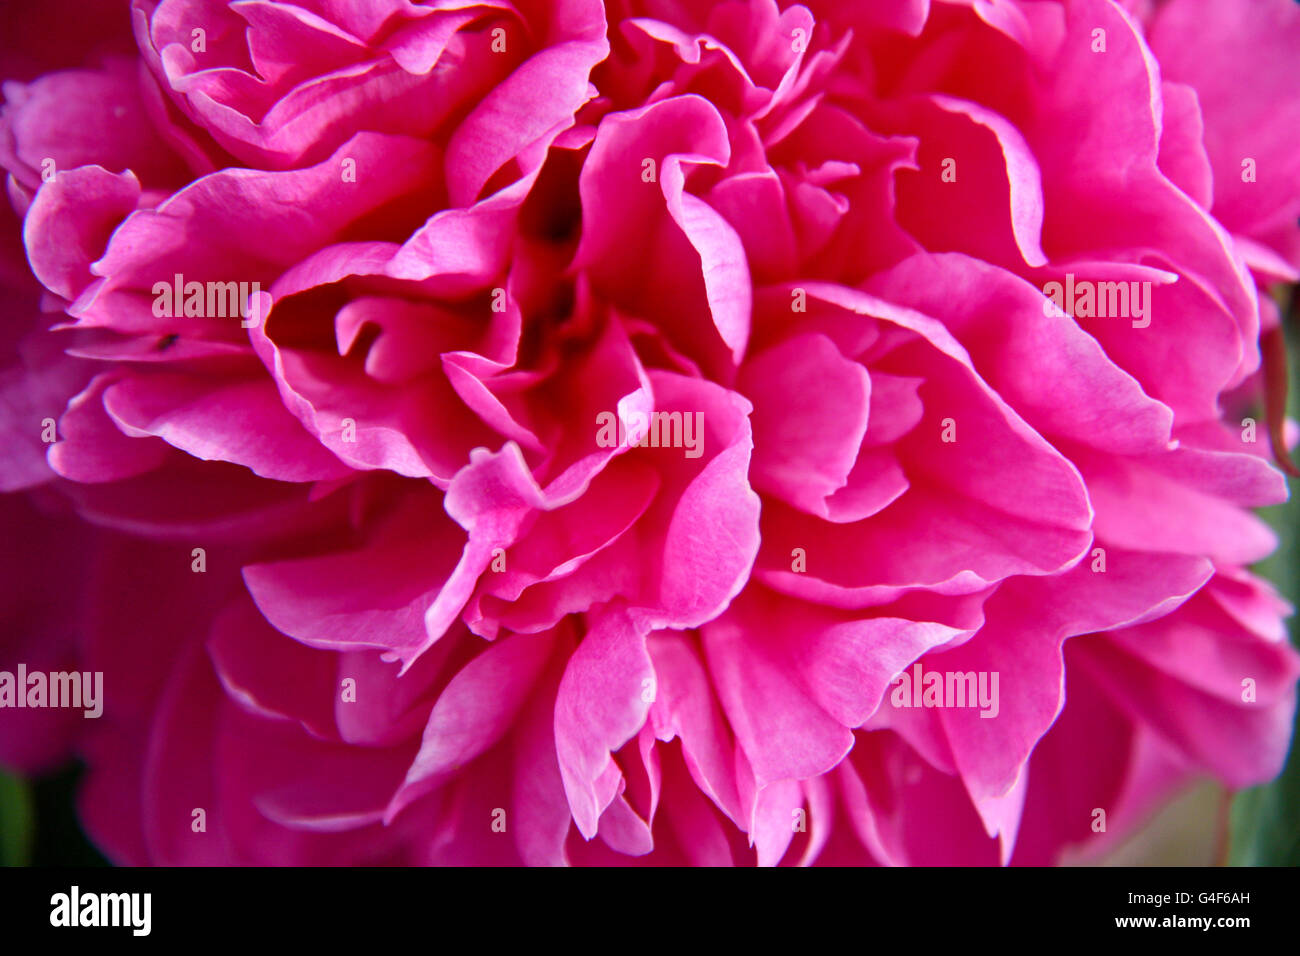 Natural floral background pattern. Stock Photo